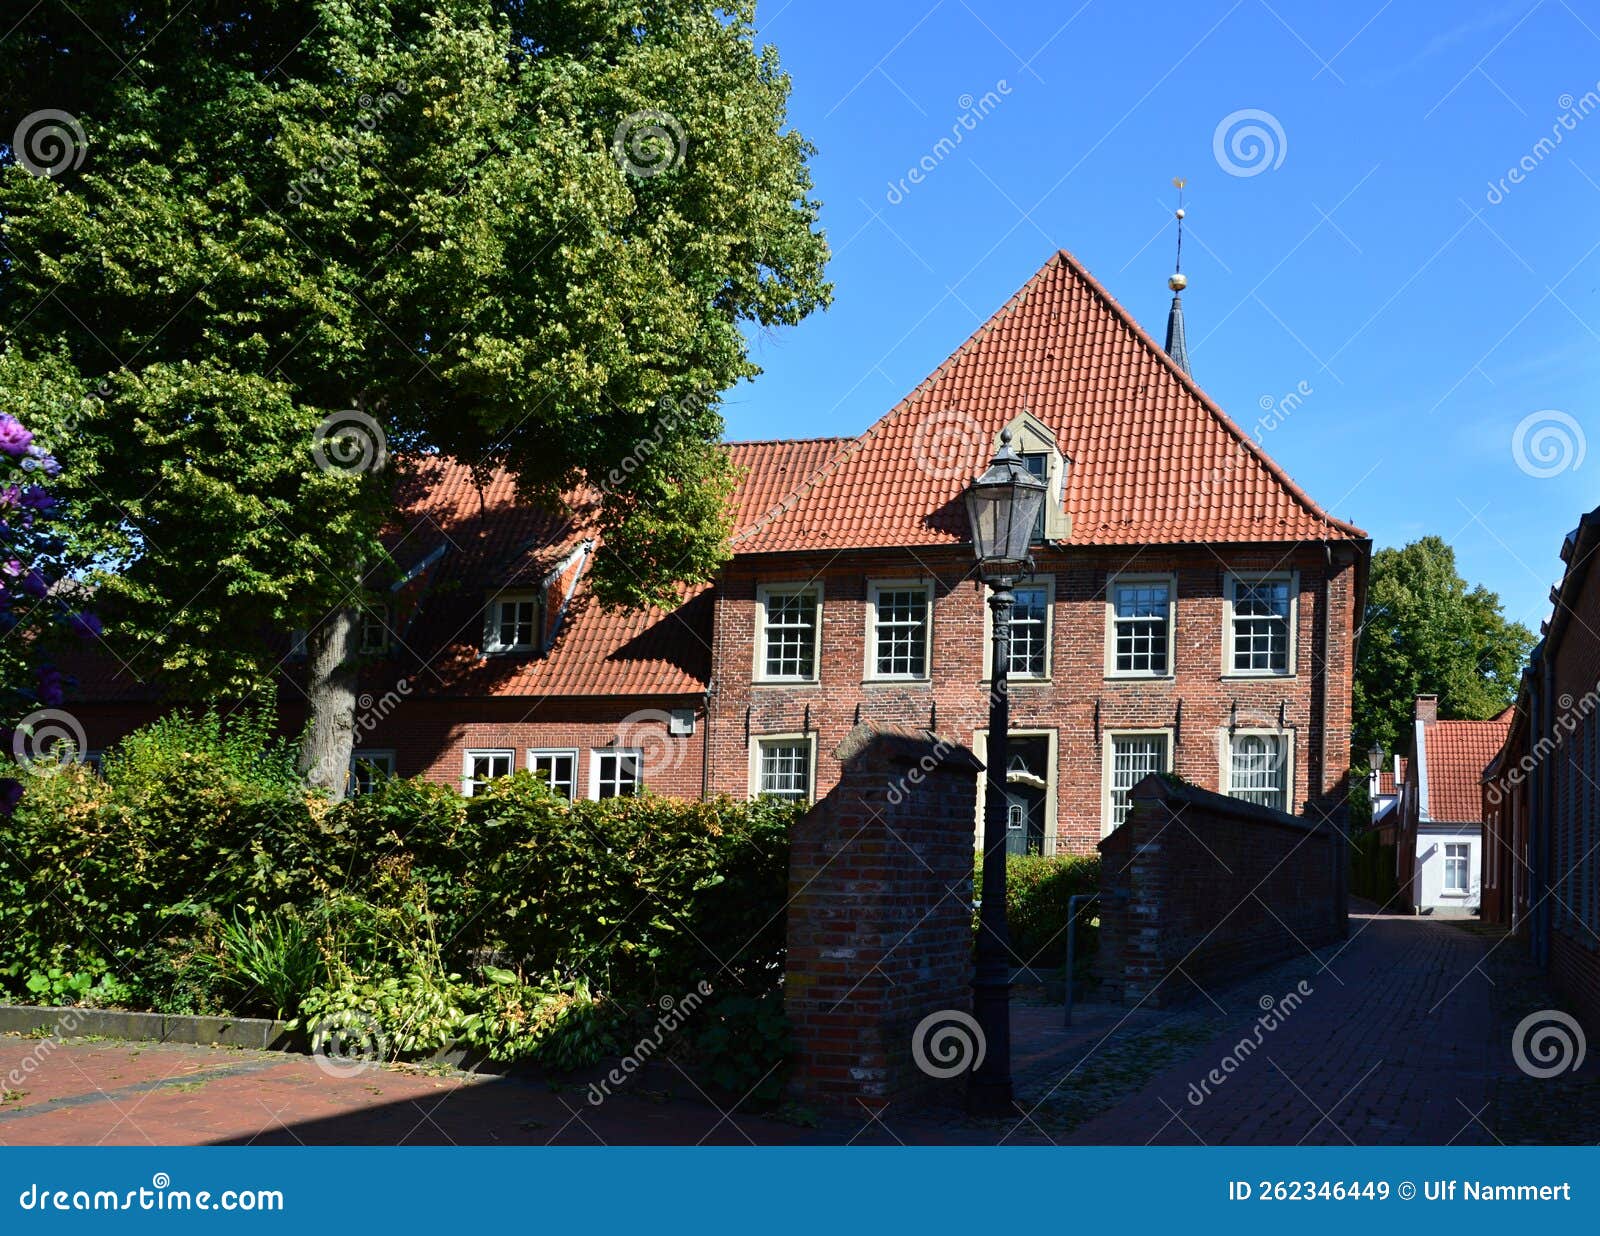 historical church in the old town of leer, east frisia, lower saxony